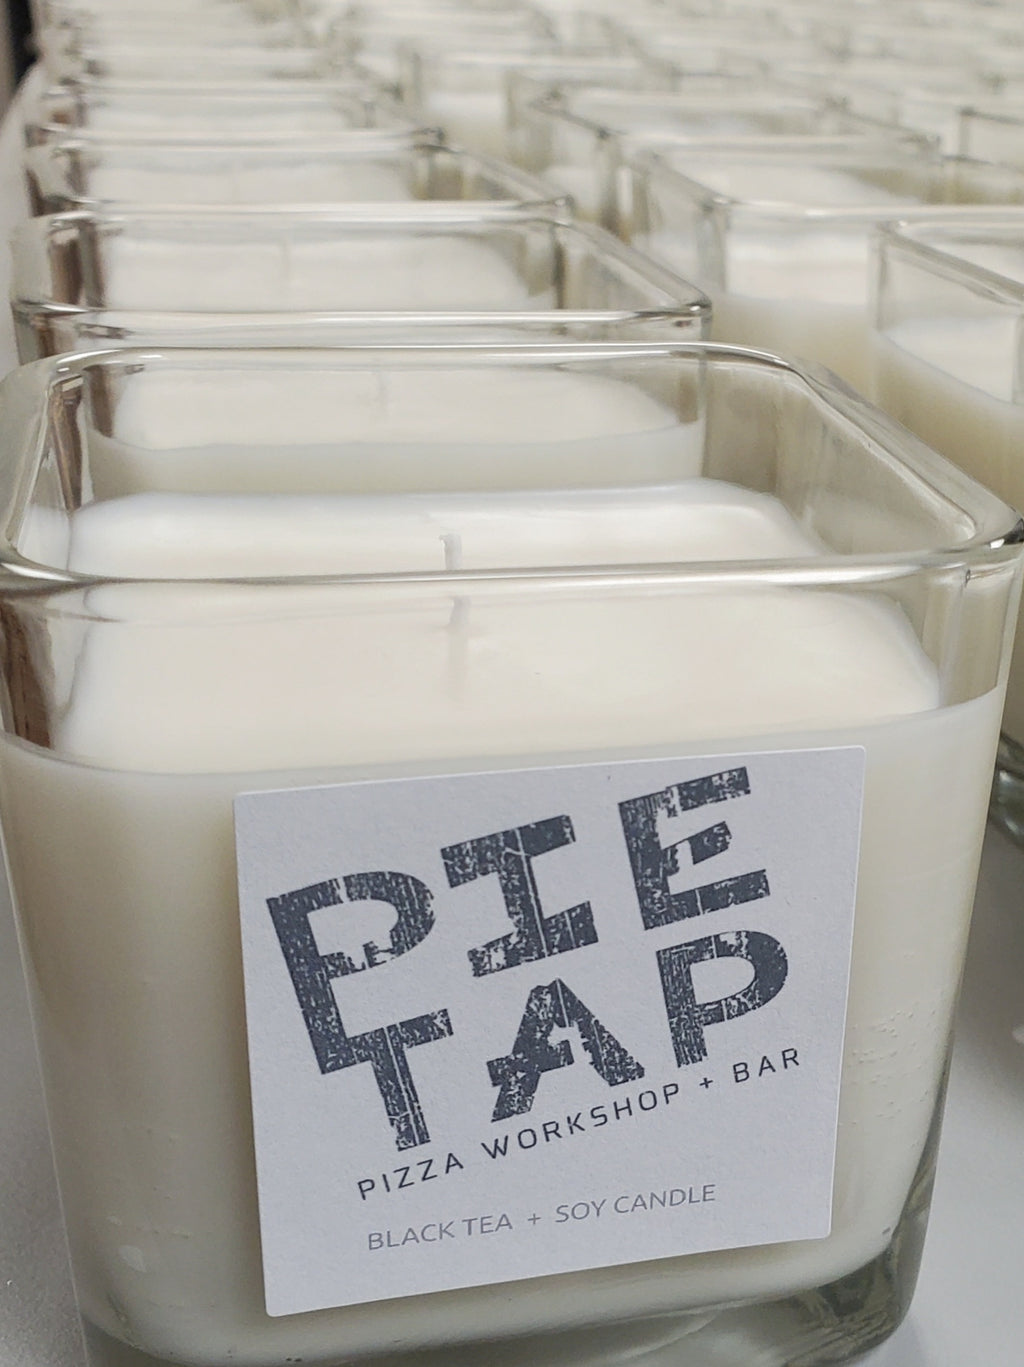 PIE TAP has a Special version of Black Tea! Sold at all Pie Tap locations